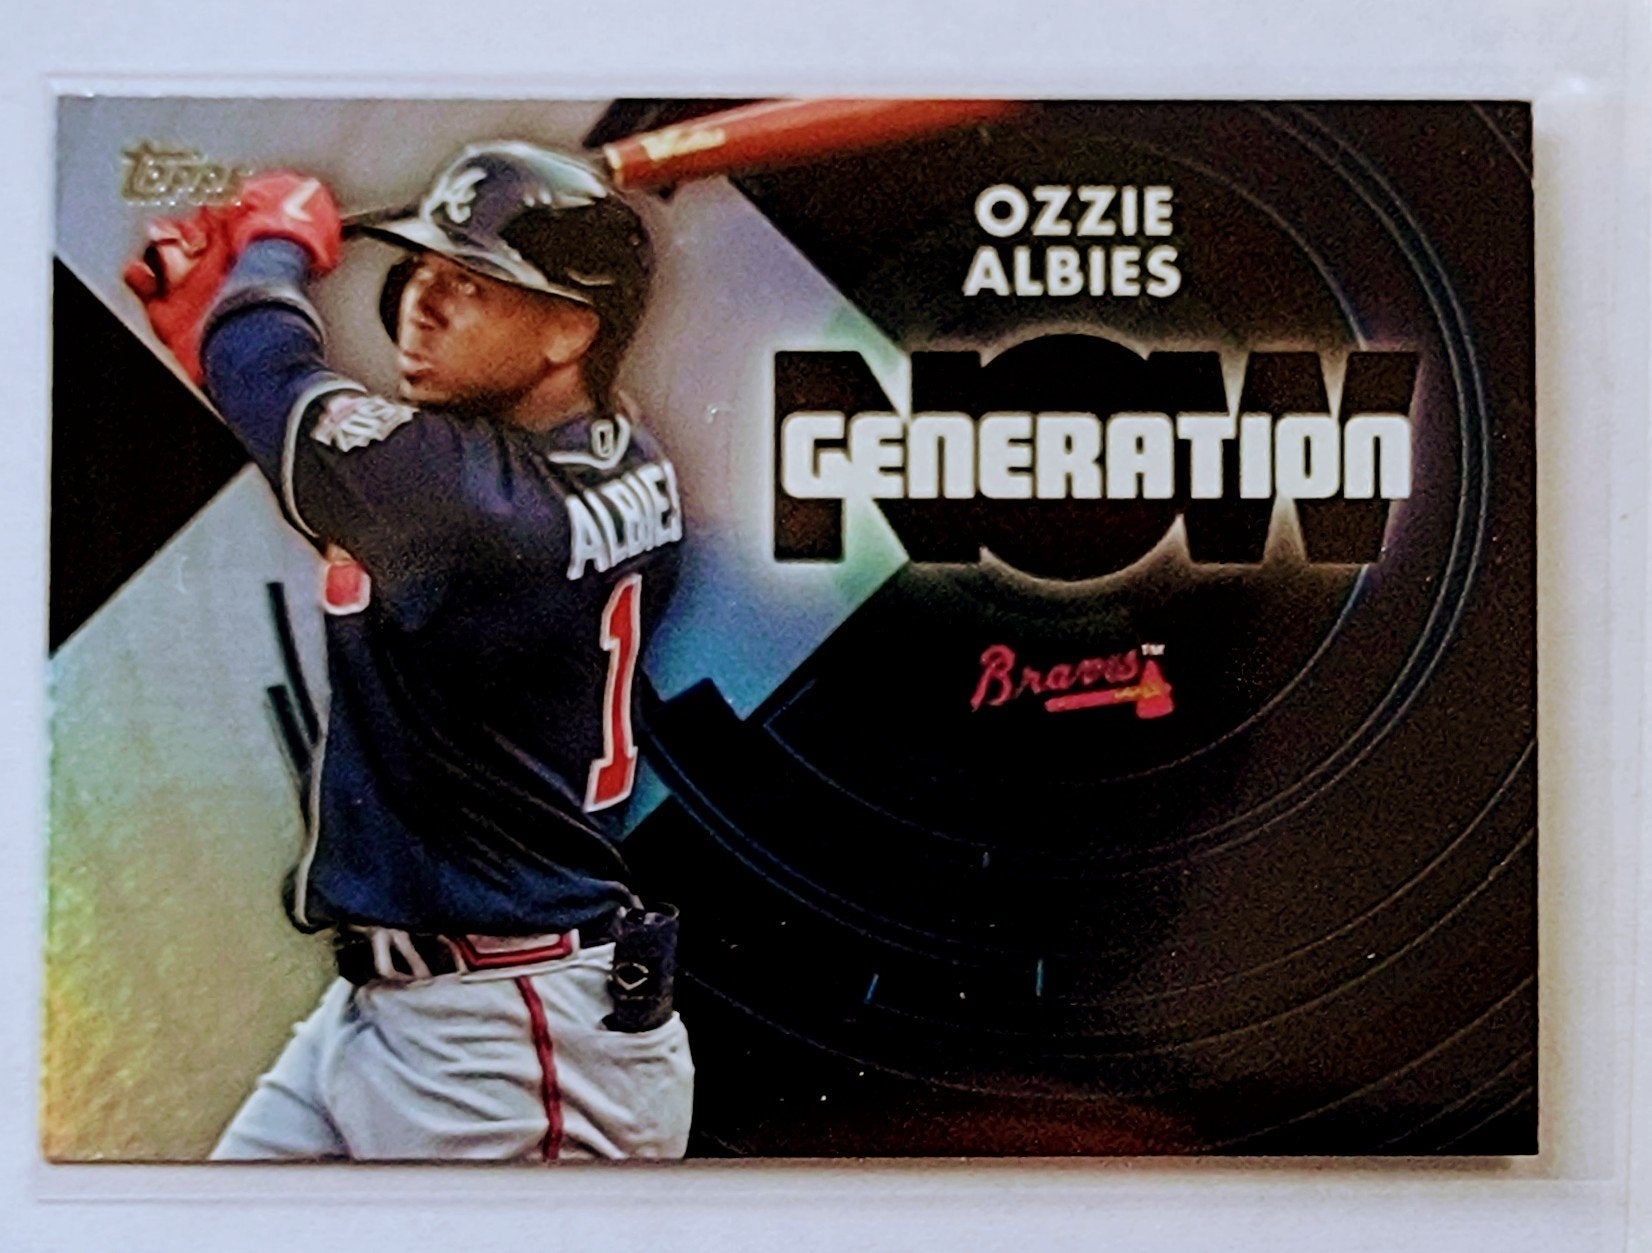 2022 Topps Ozzie Albies Generation Now Insert Baseball Card simple Xclusive Collectibles   